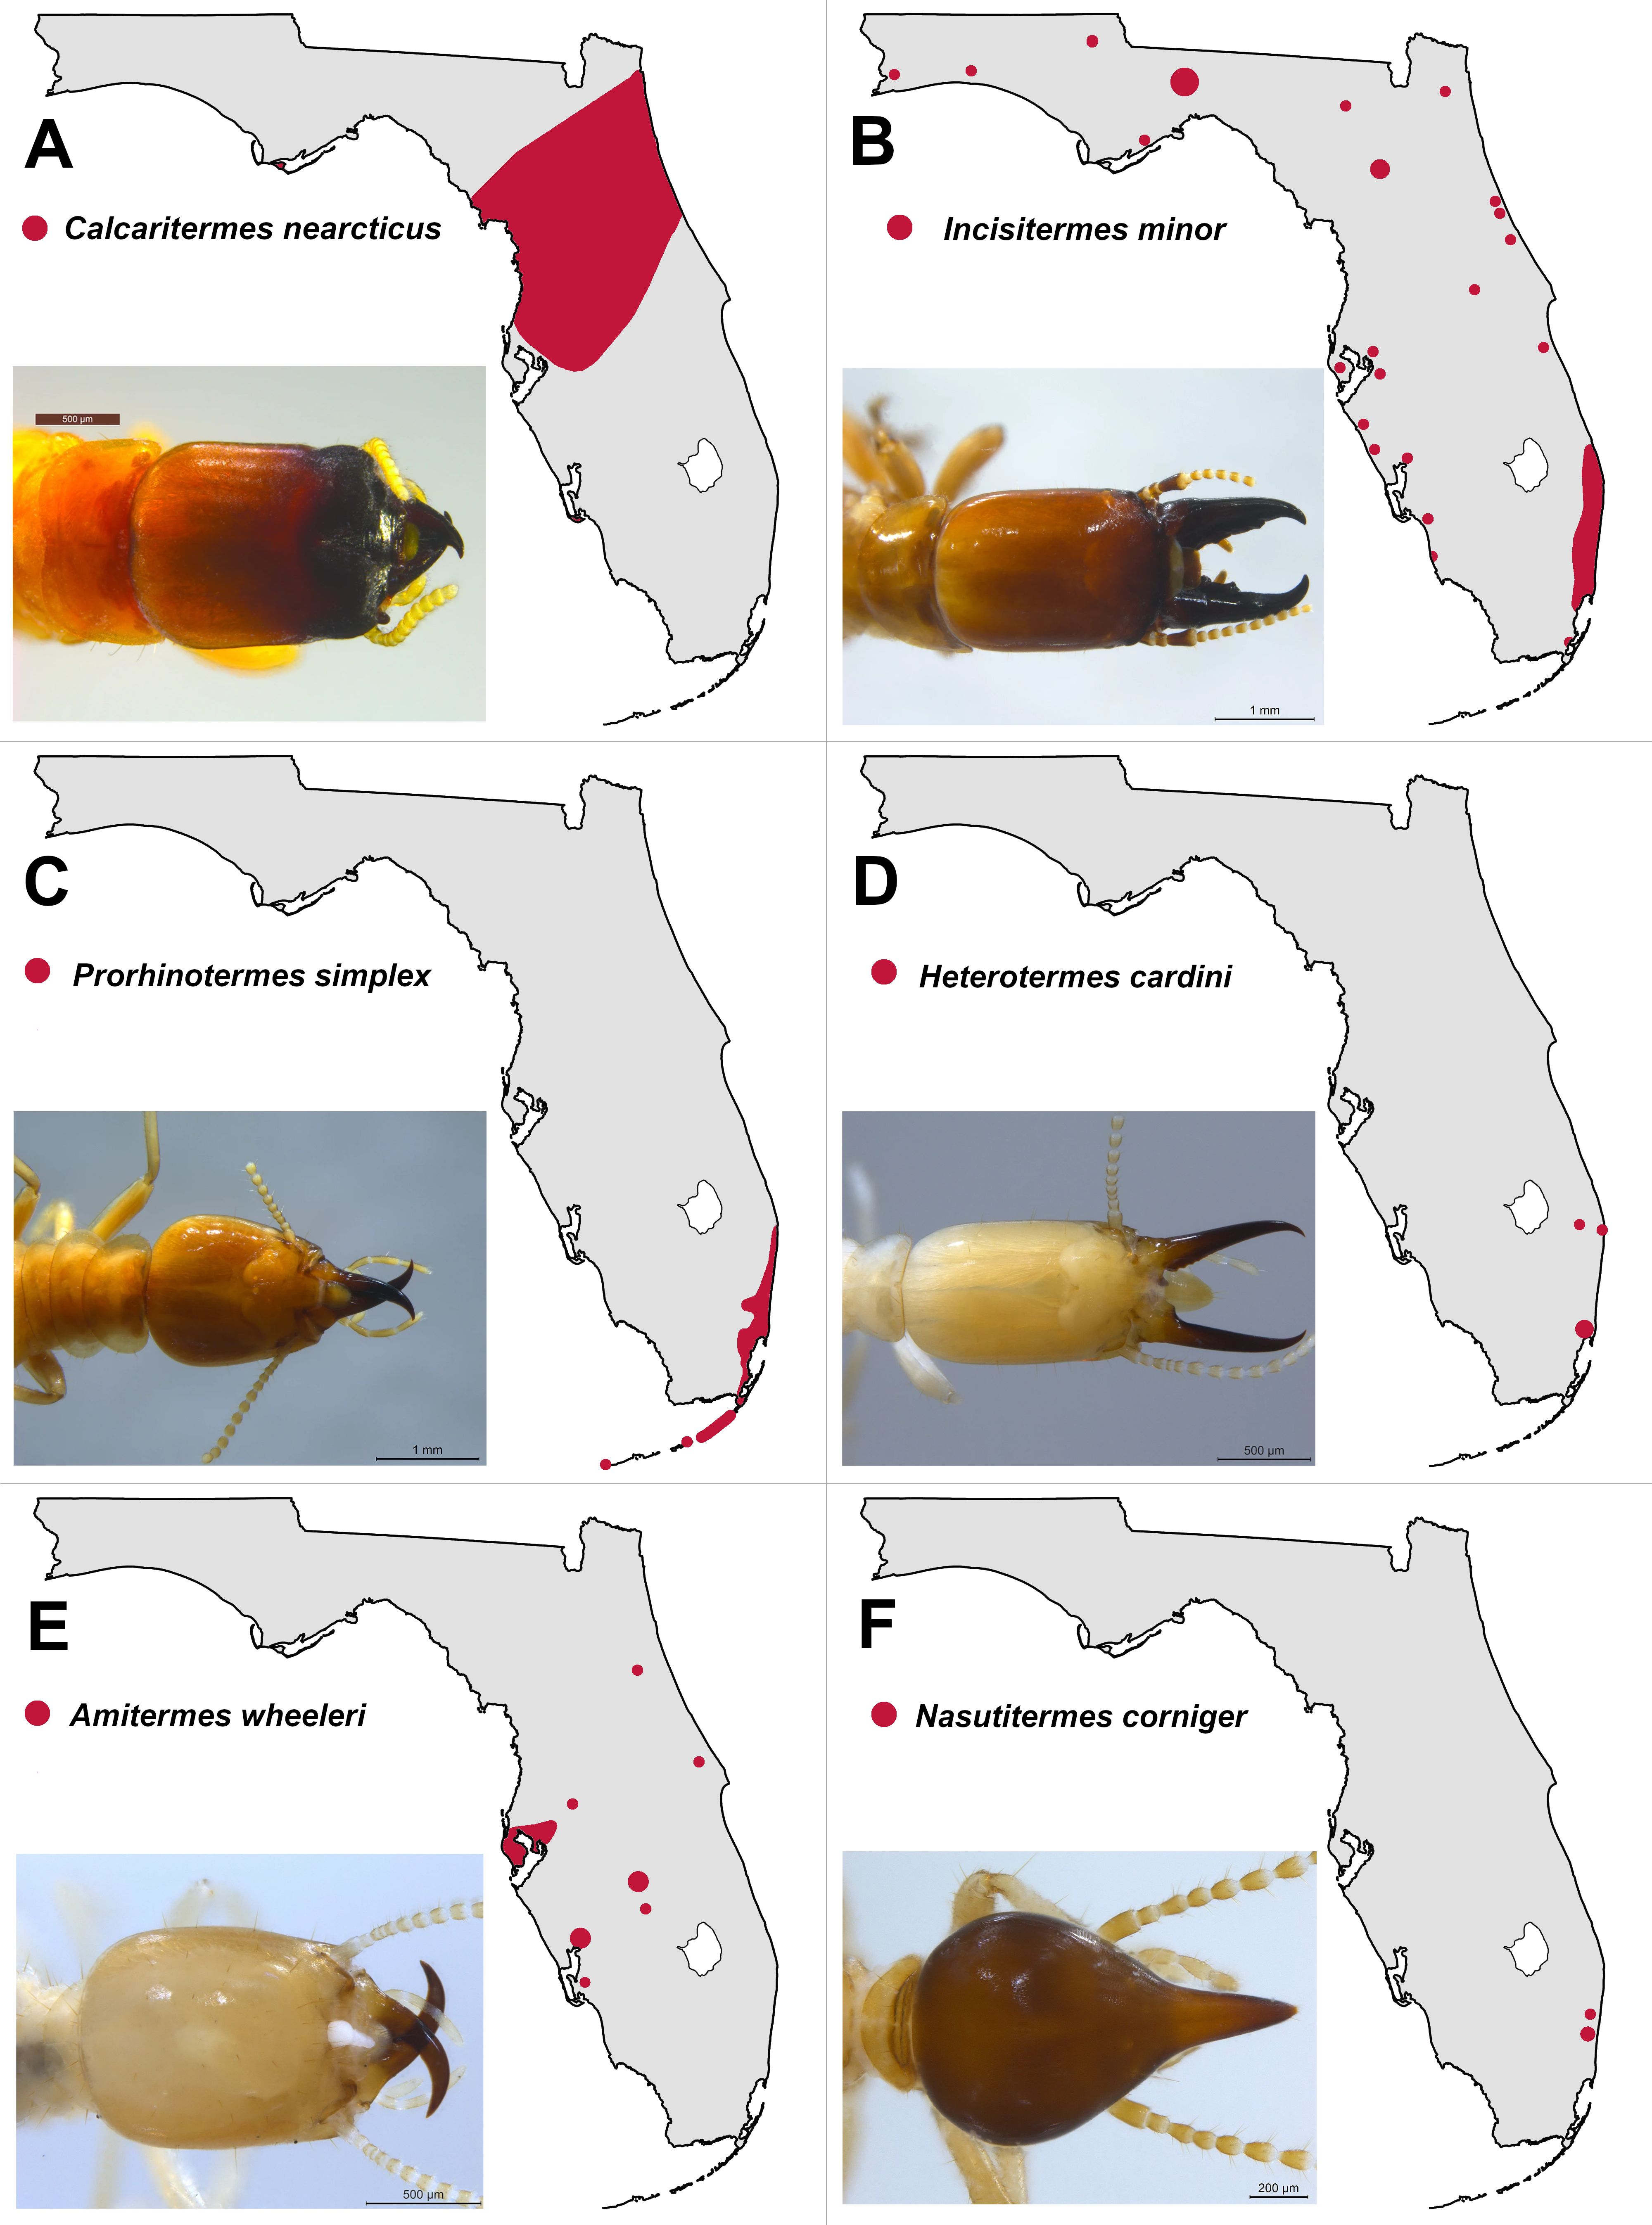 Rarely reported termite species in Florida, owing to highly localized distribution or to their inaccessibility.